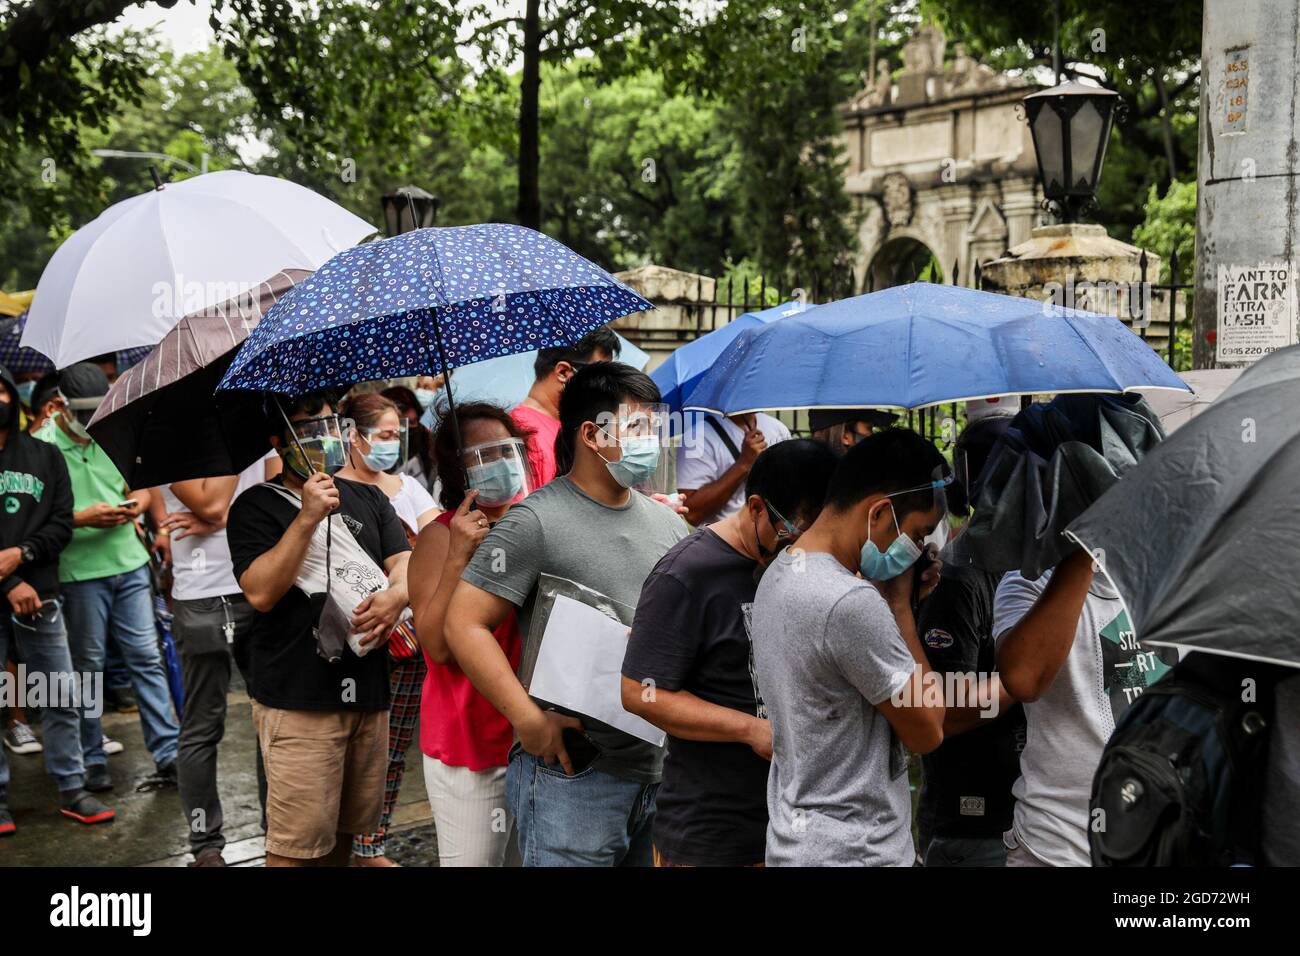 People wearing a protective mask and face shields queue to receive a shot of the AstraZeneca COVID-19 vaccine at the University of Santo Tomas. The university opened its vaccination site where about 1,000 doses of the AstraZeneca vaccine were administered by medical clerks and government health workers. Manila, Philippines. Stock Photo